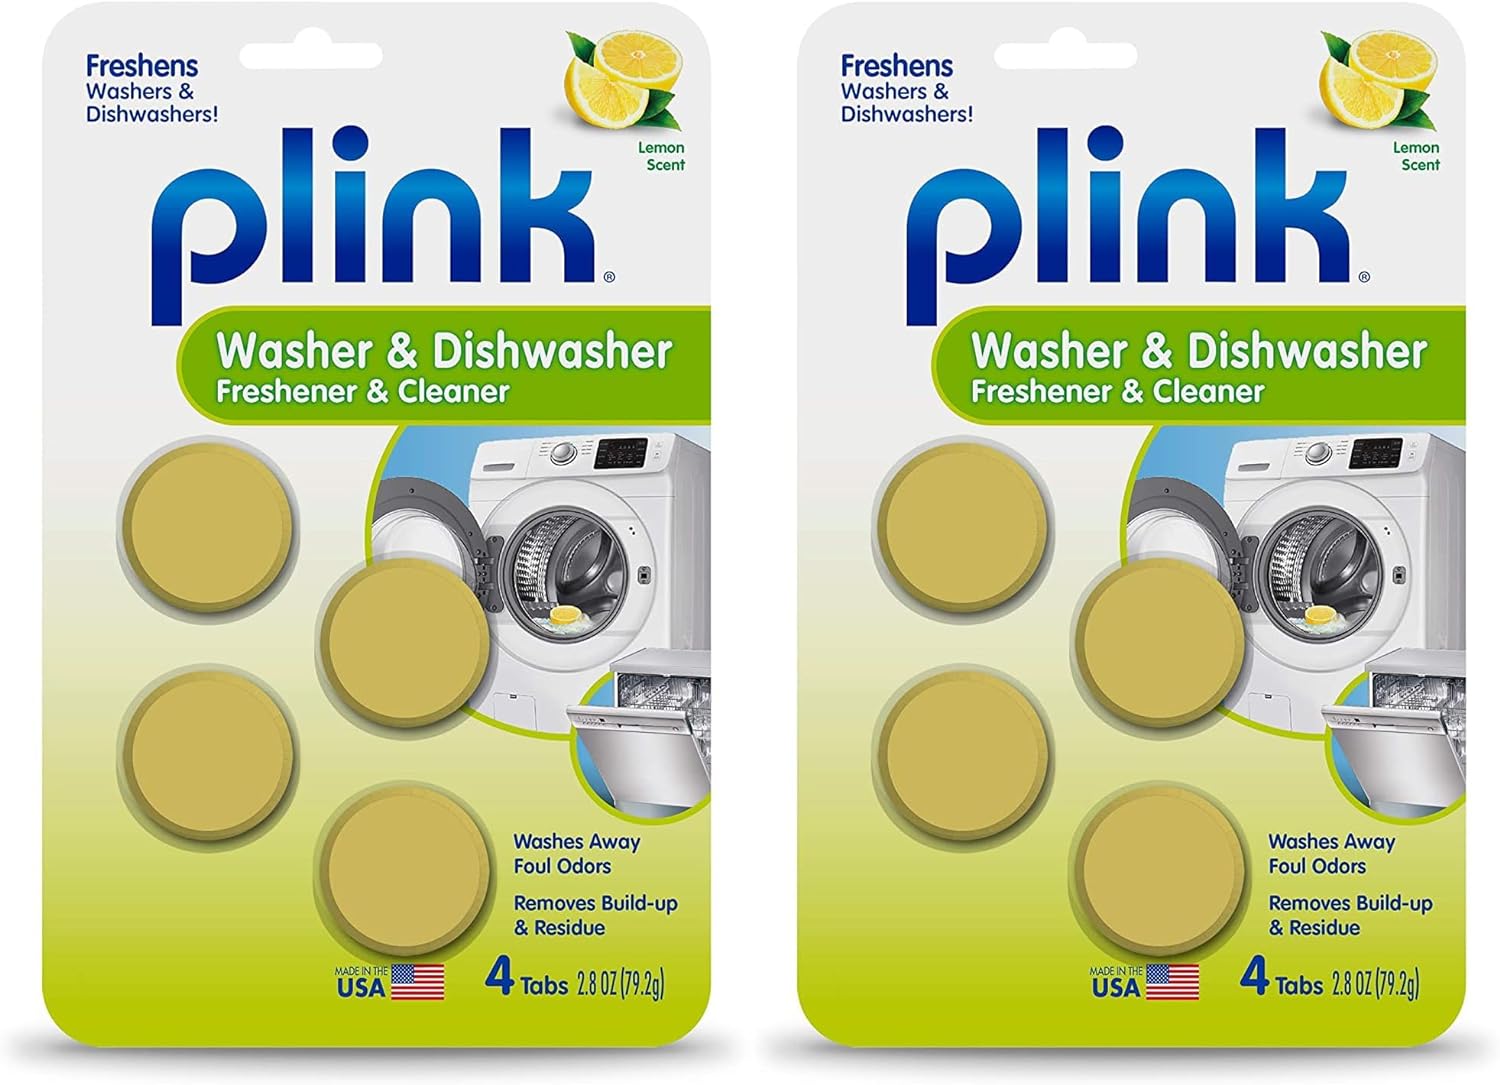 Plink Washer and Dishwasher Freshener and Cleaner, Prevents Residue, Removes Odors in Kitchen and Laundry Room Appliances, Septic-Friendly, Fresh Lemon Scent, 2 Packs of 4 Tablets